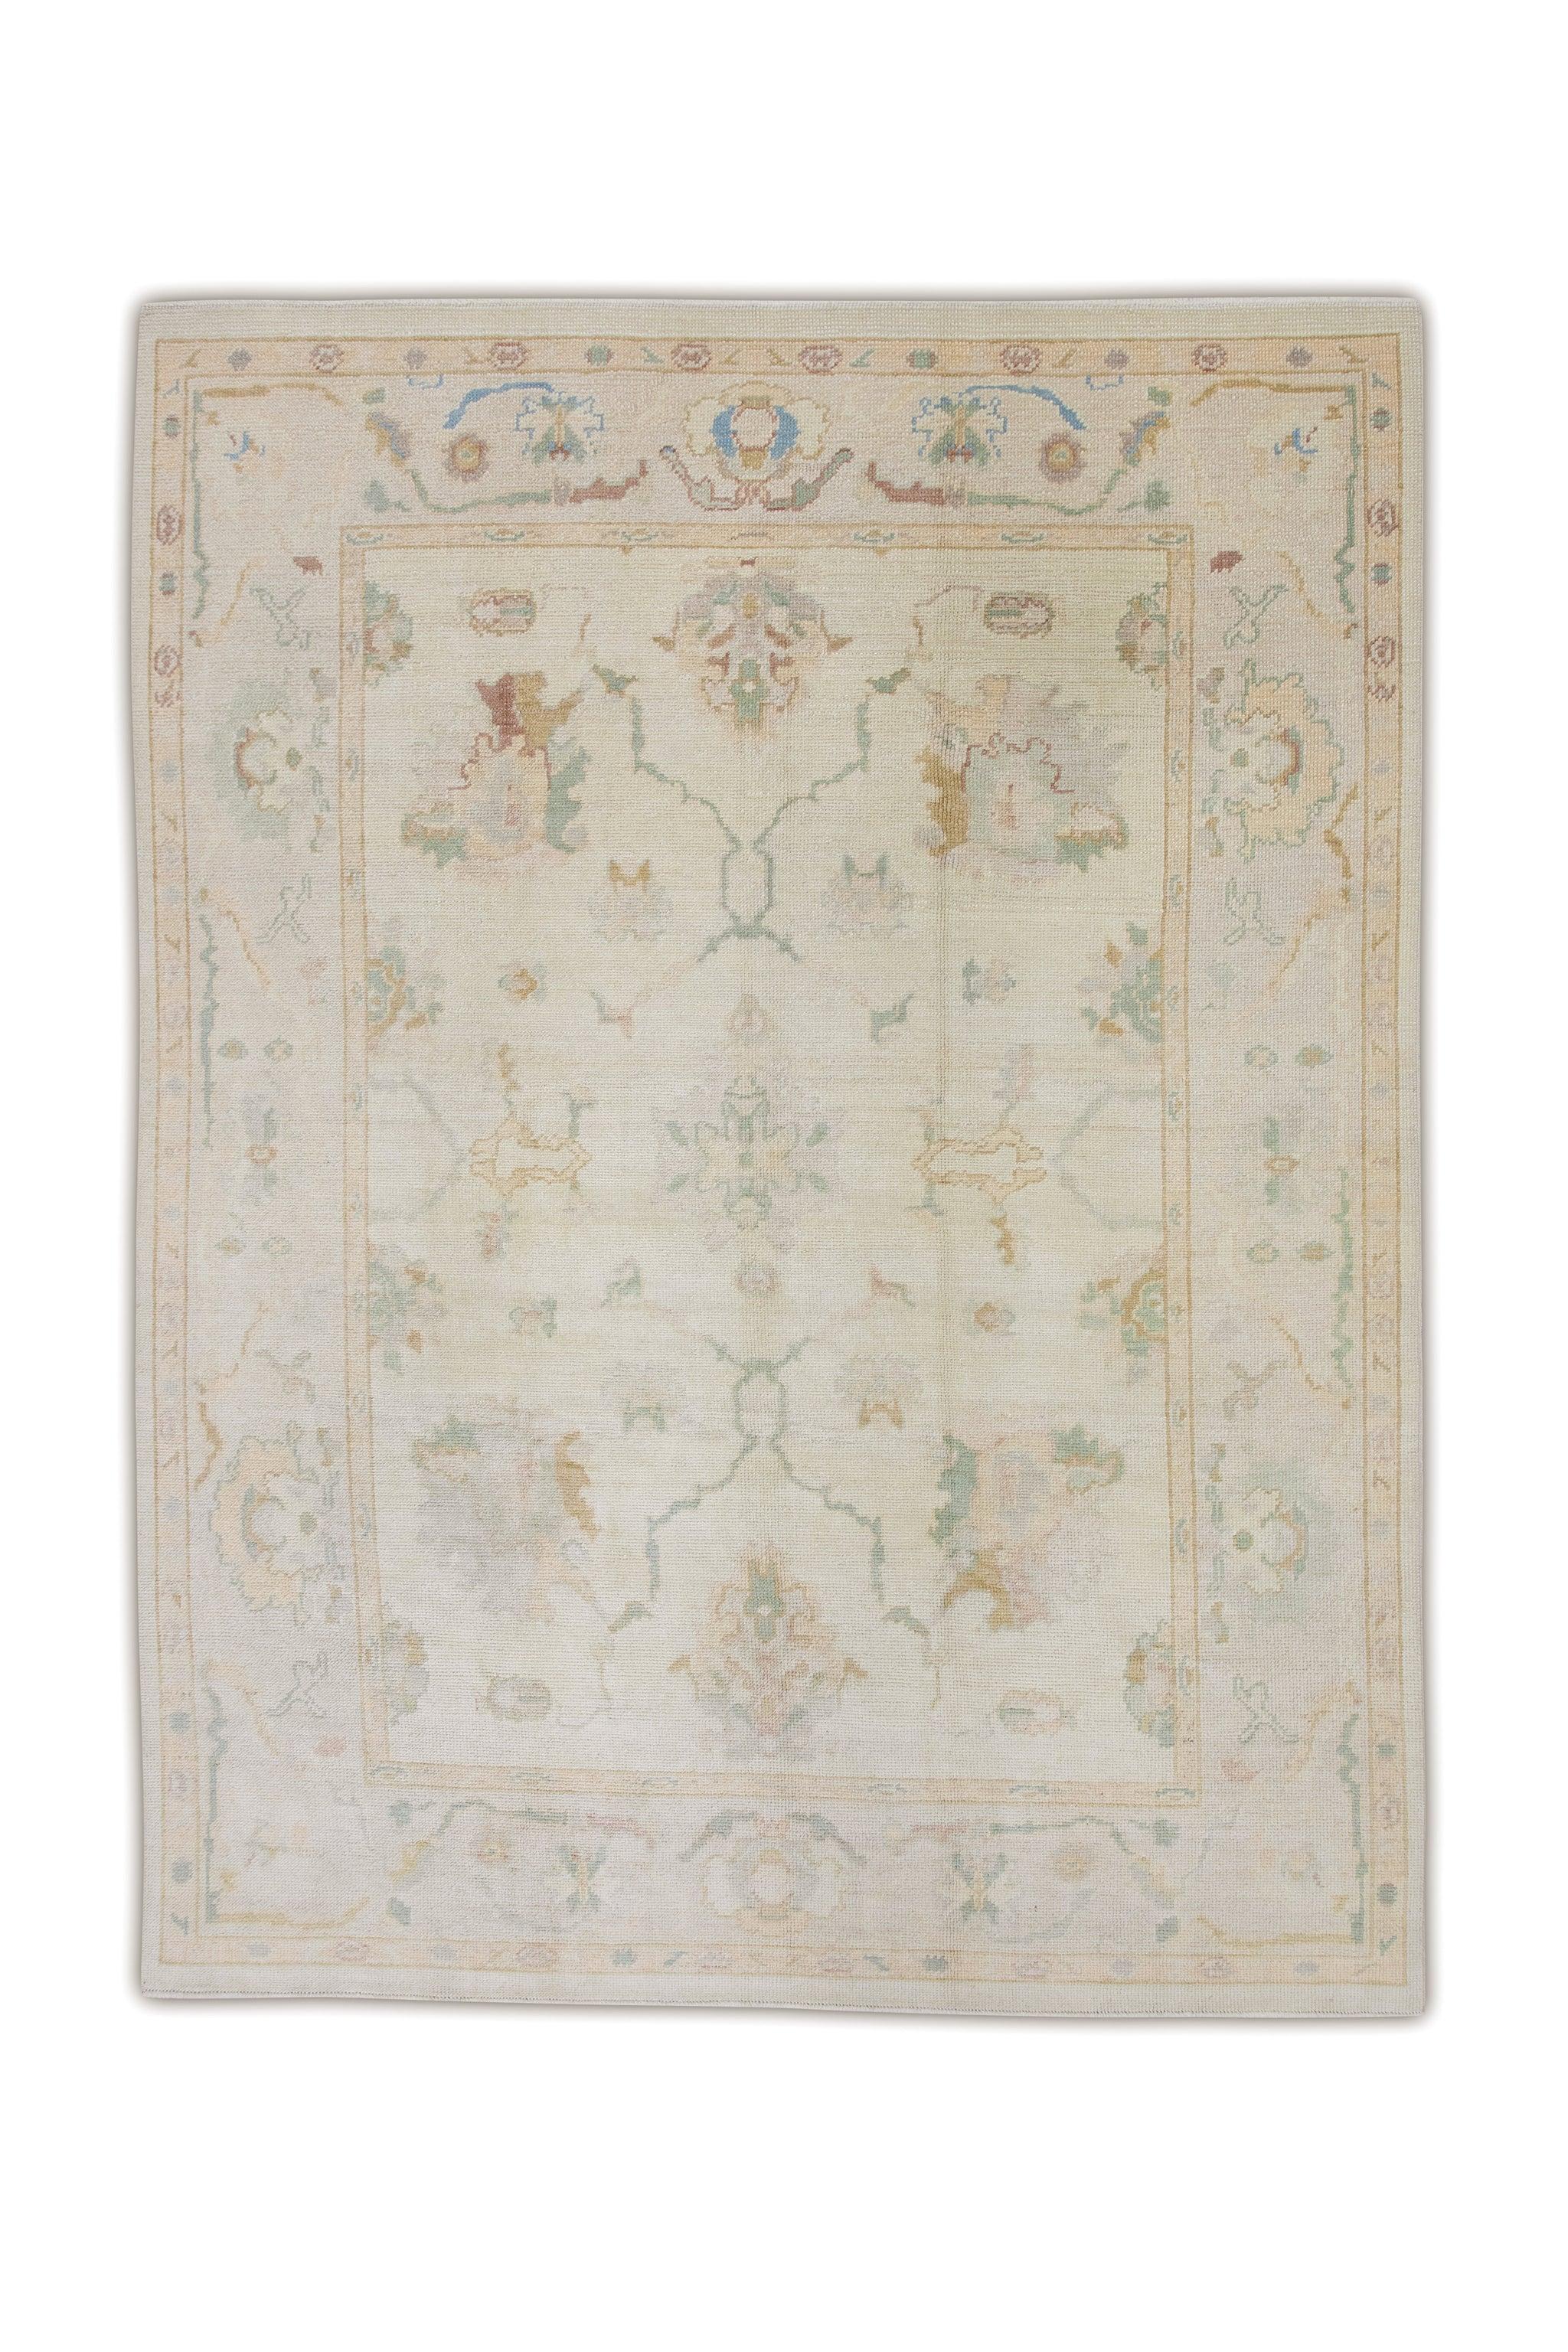 Handwoven Wool Floral Turkish Oushak Rug in Soft Pink, Green, Blue 6'10